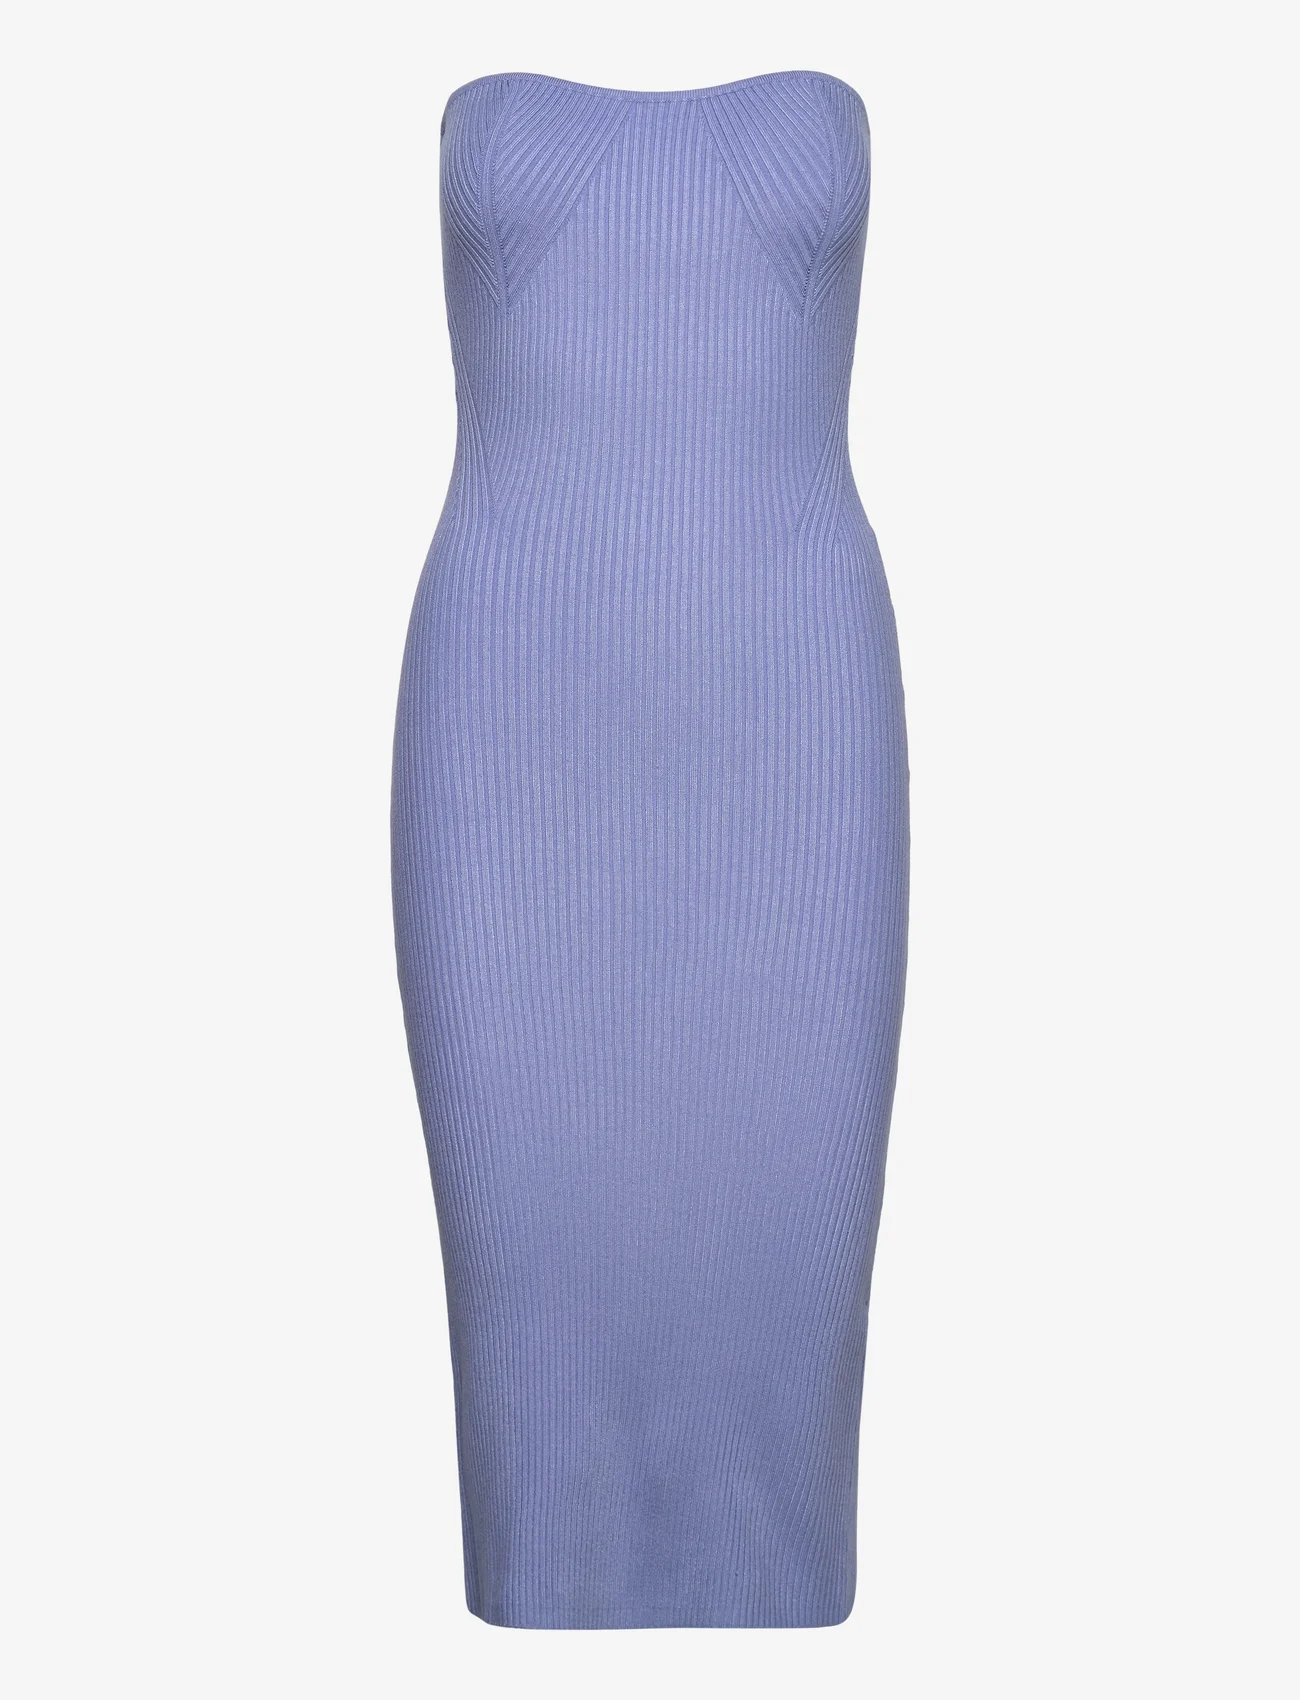 Gina Tricot - Knitted tube dress - robes moulantes - cornflower blue (5170) - 0